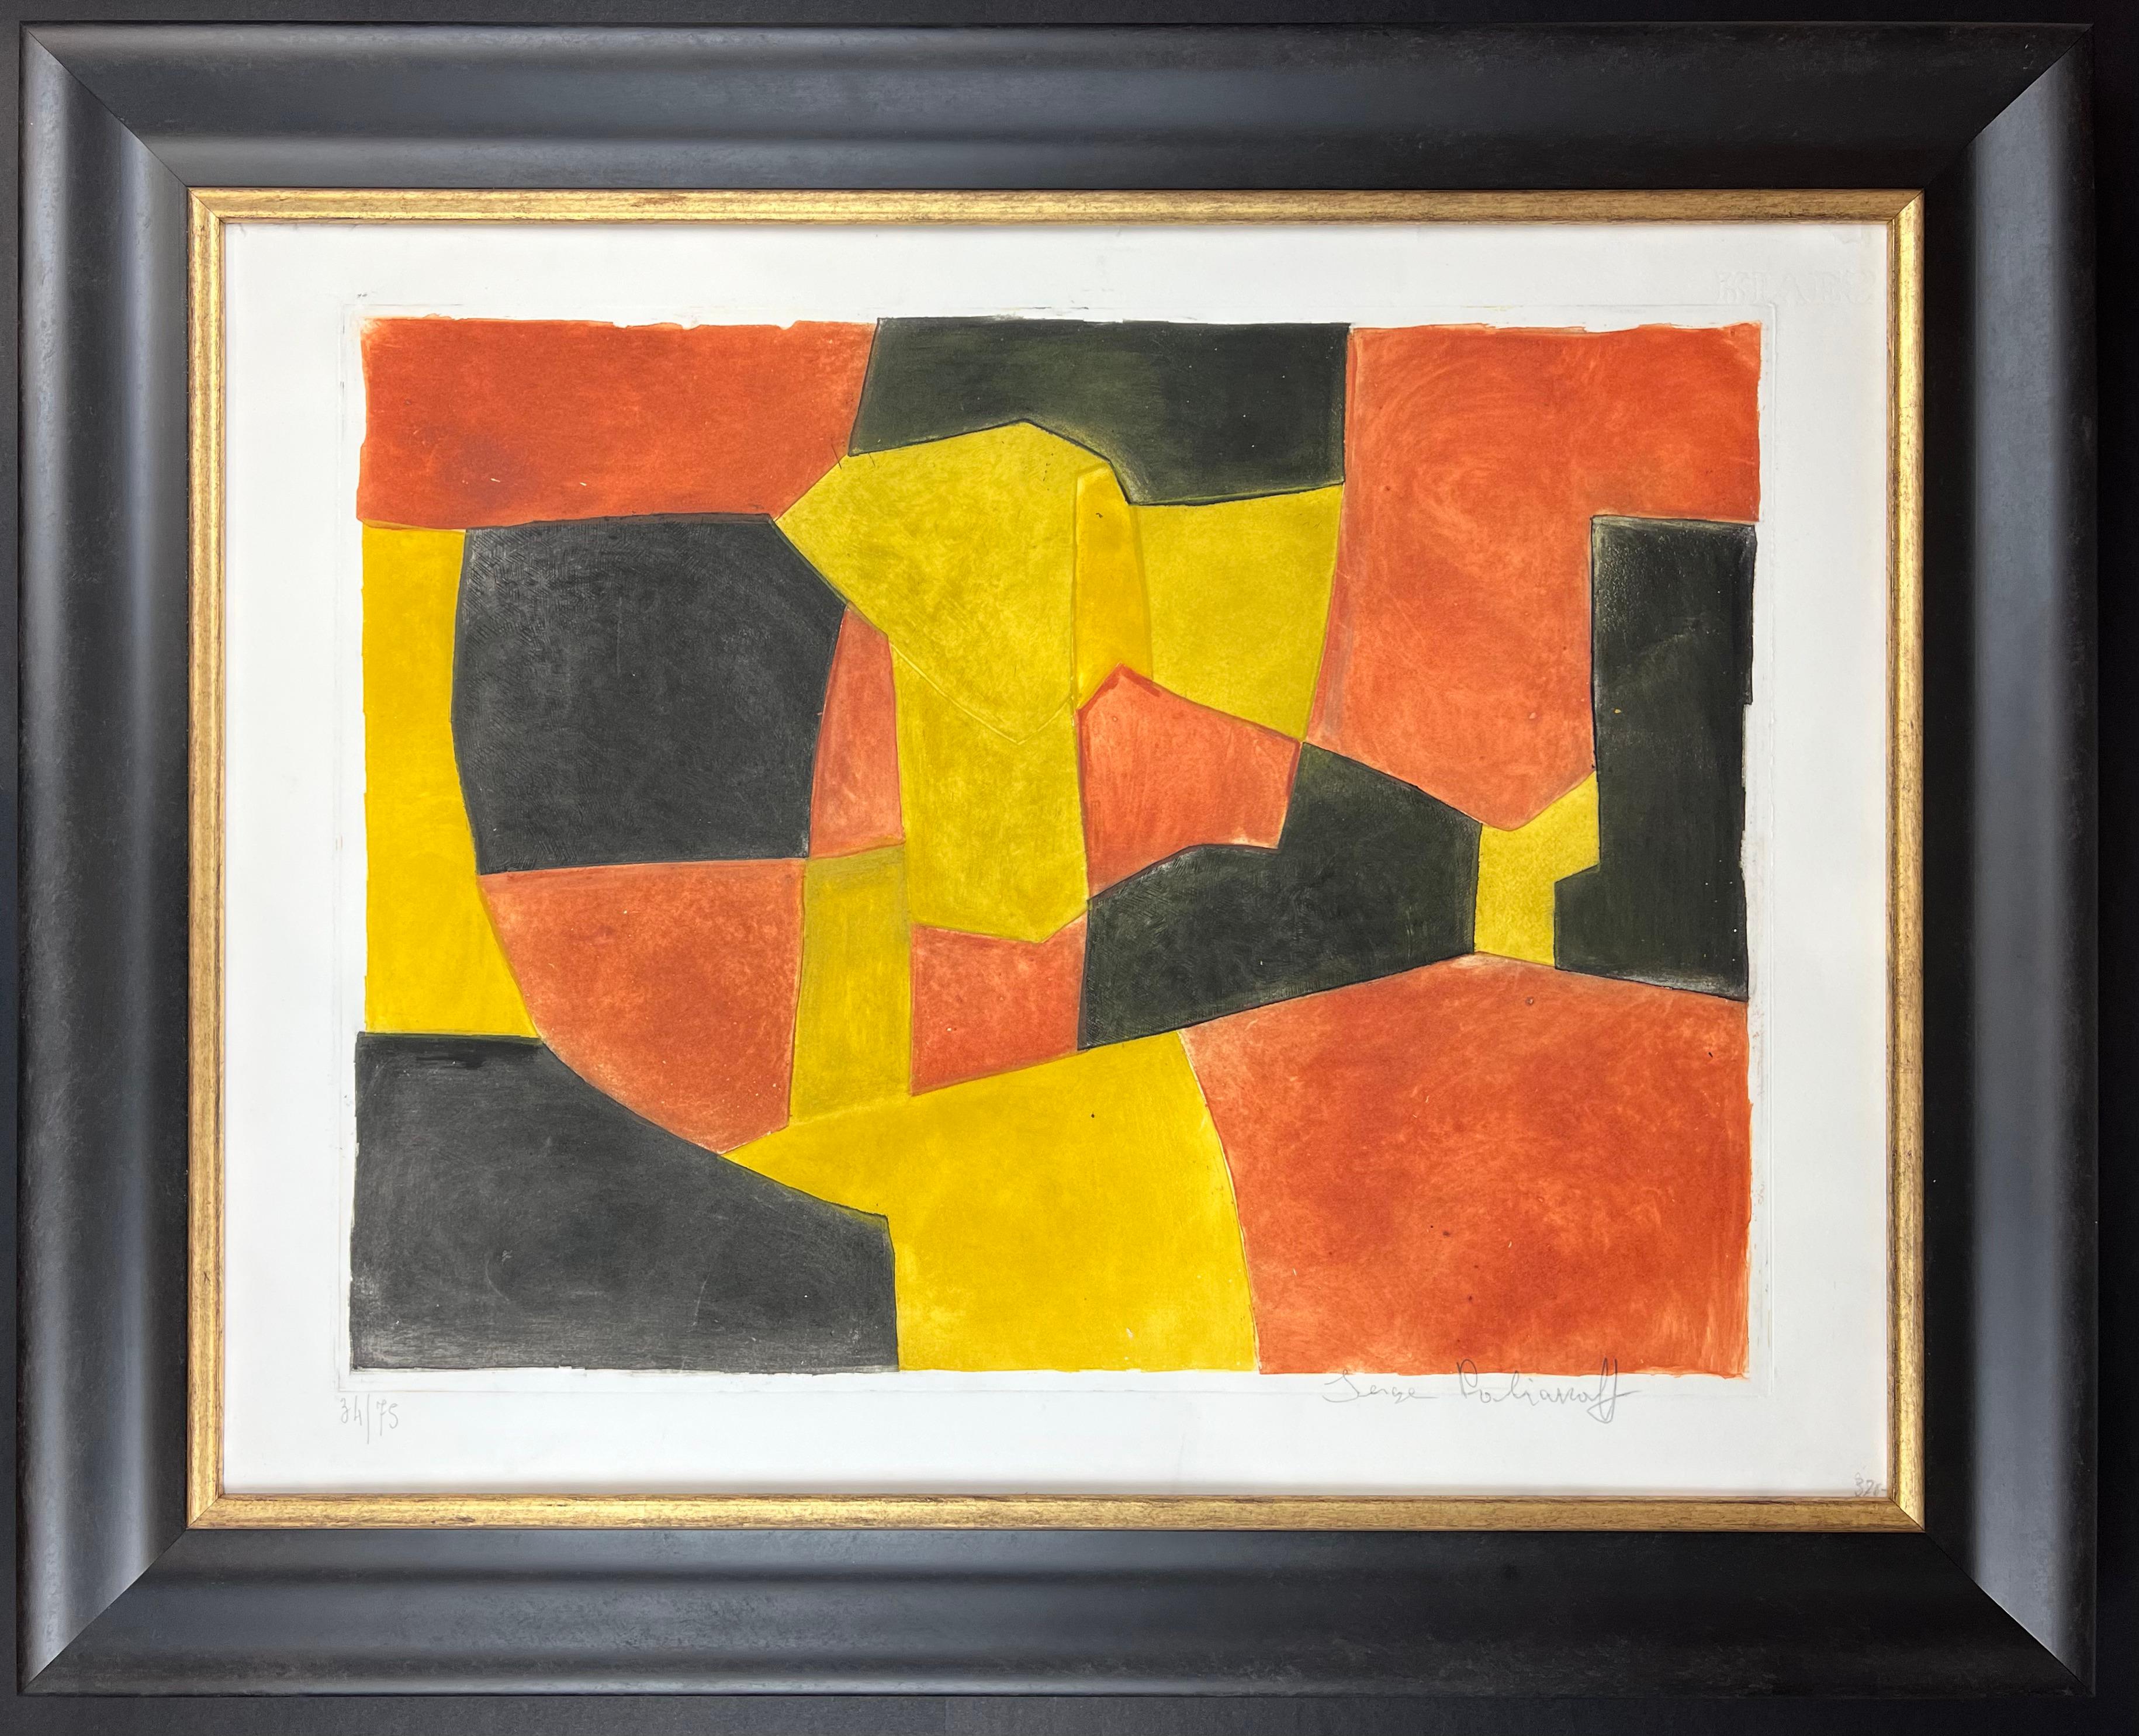 Composition noire, jaune et brune
etching and aquatint on Rives paper , edited in 1962
Limited Edition of 75 copies
Hand signed in pencil by artist lower right and numbered 34/75 lower left
Paper size: 57 x 74,5 cm
Framed size: 72 x 89 cm

In very